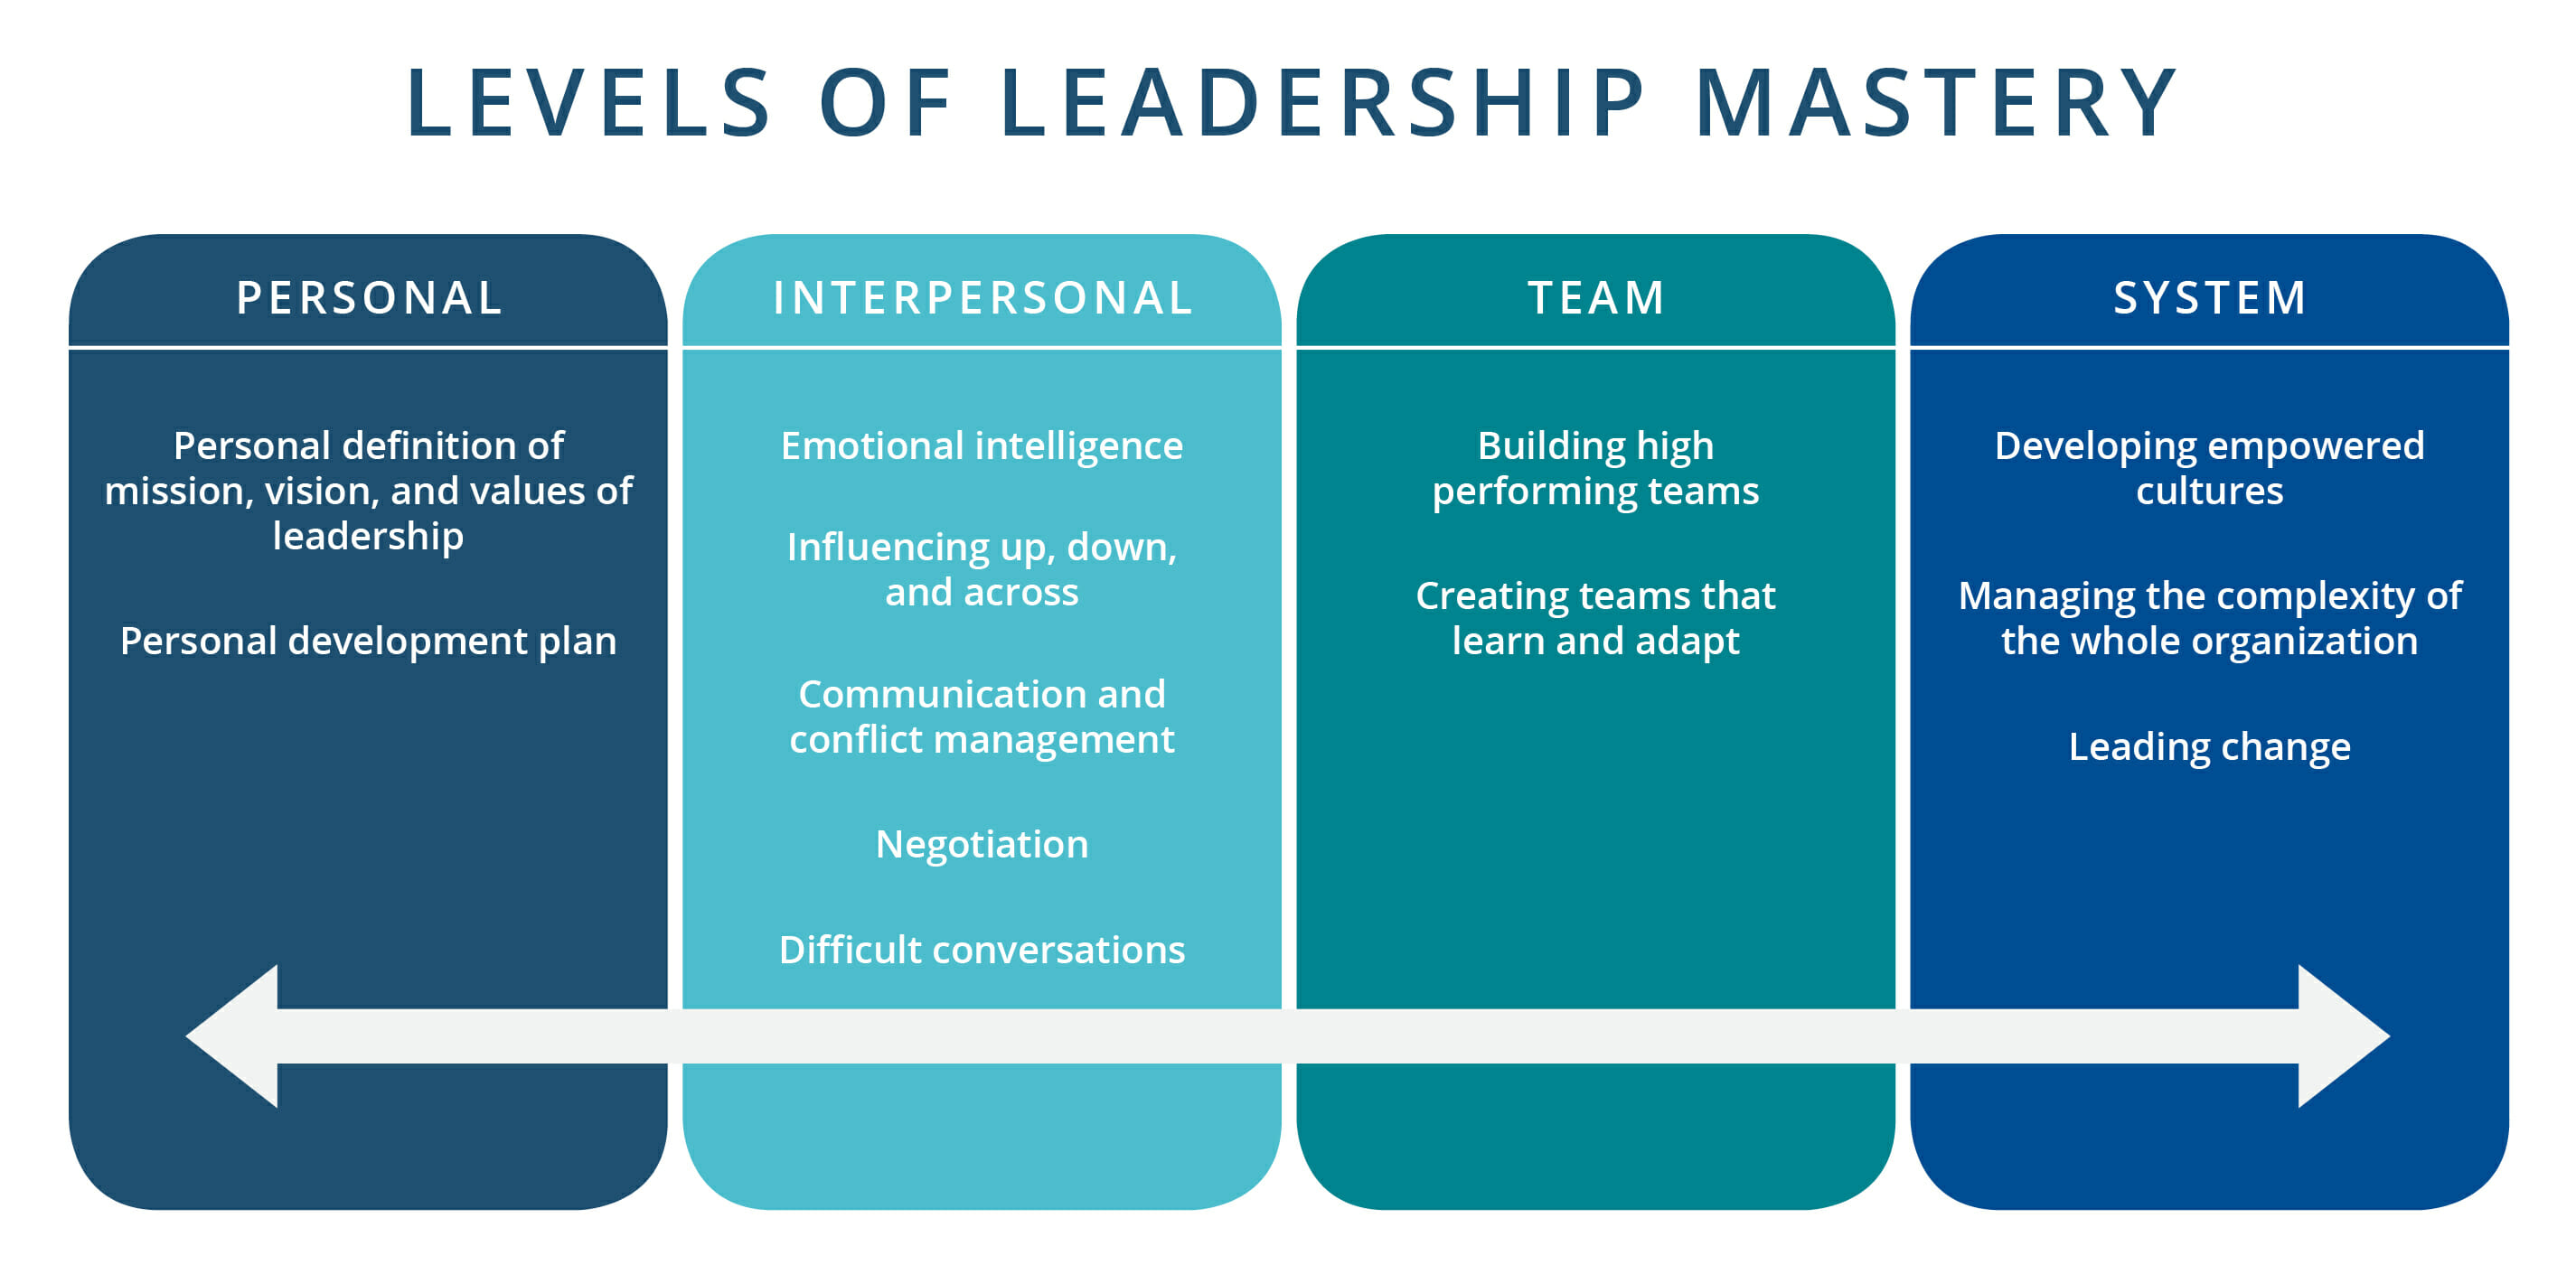 Levels of Leadership Mastery - Clint Sidle